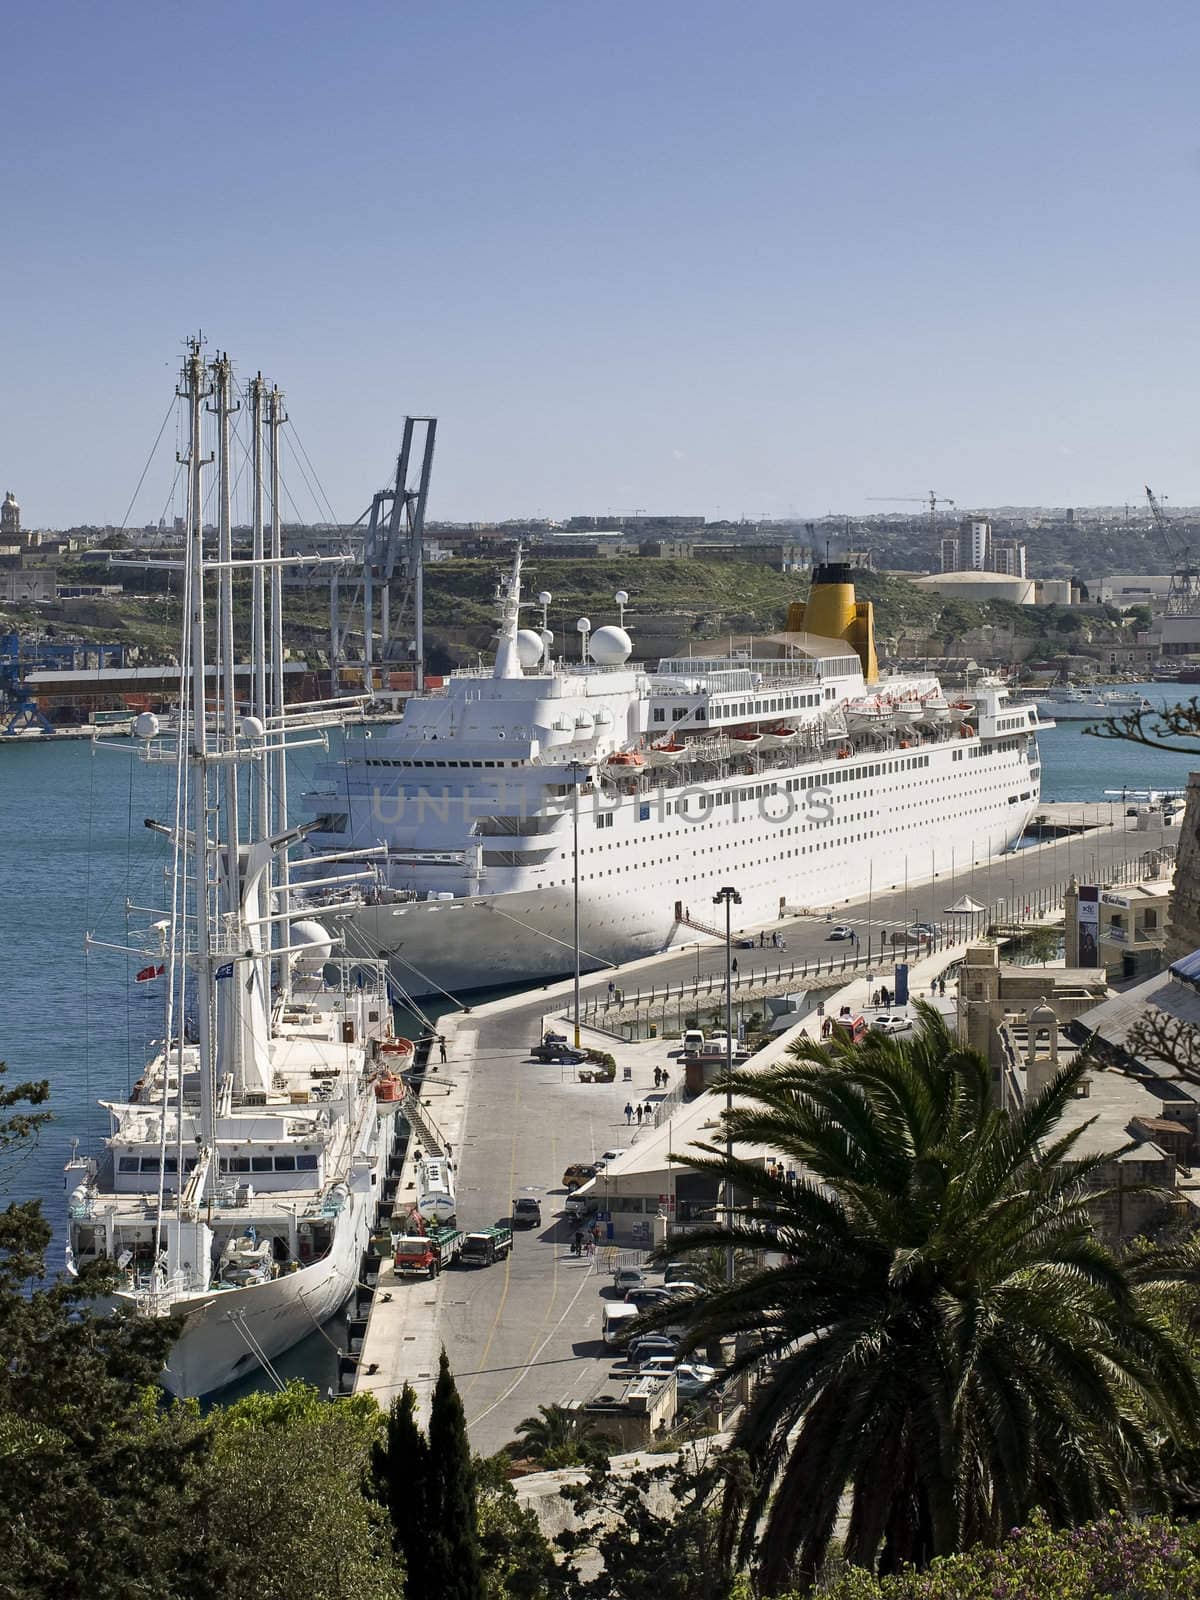 Large cruiseliner berthed in the Grand Harbour in Malta